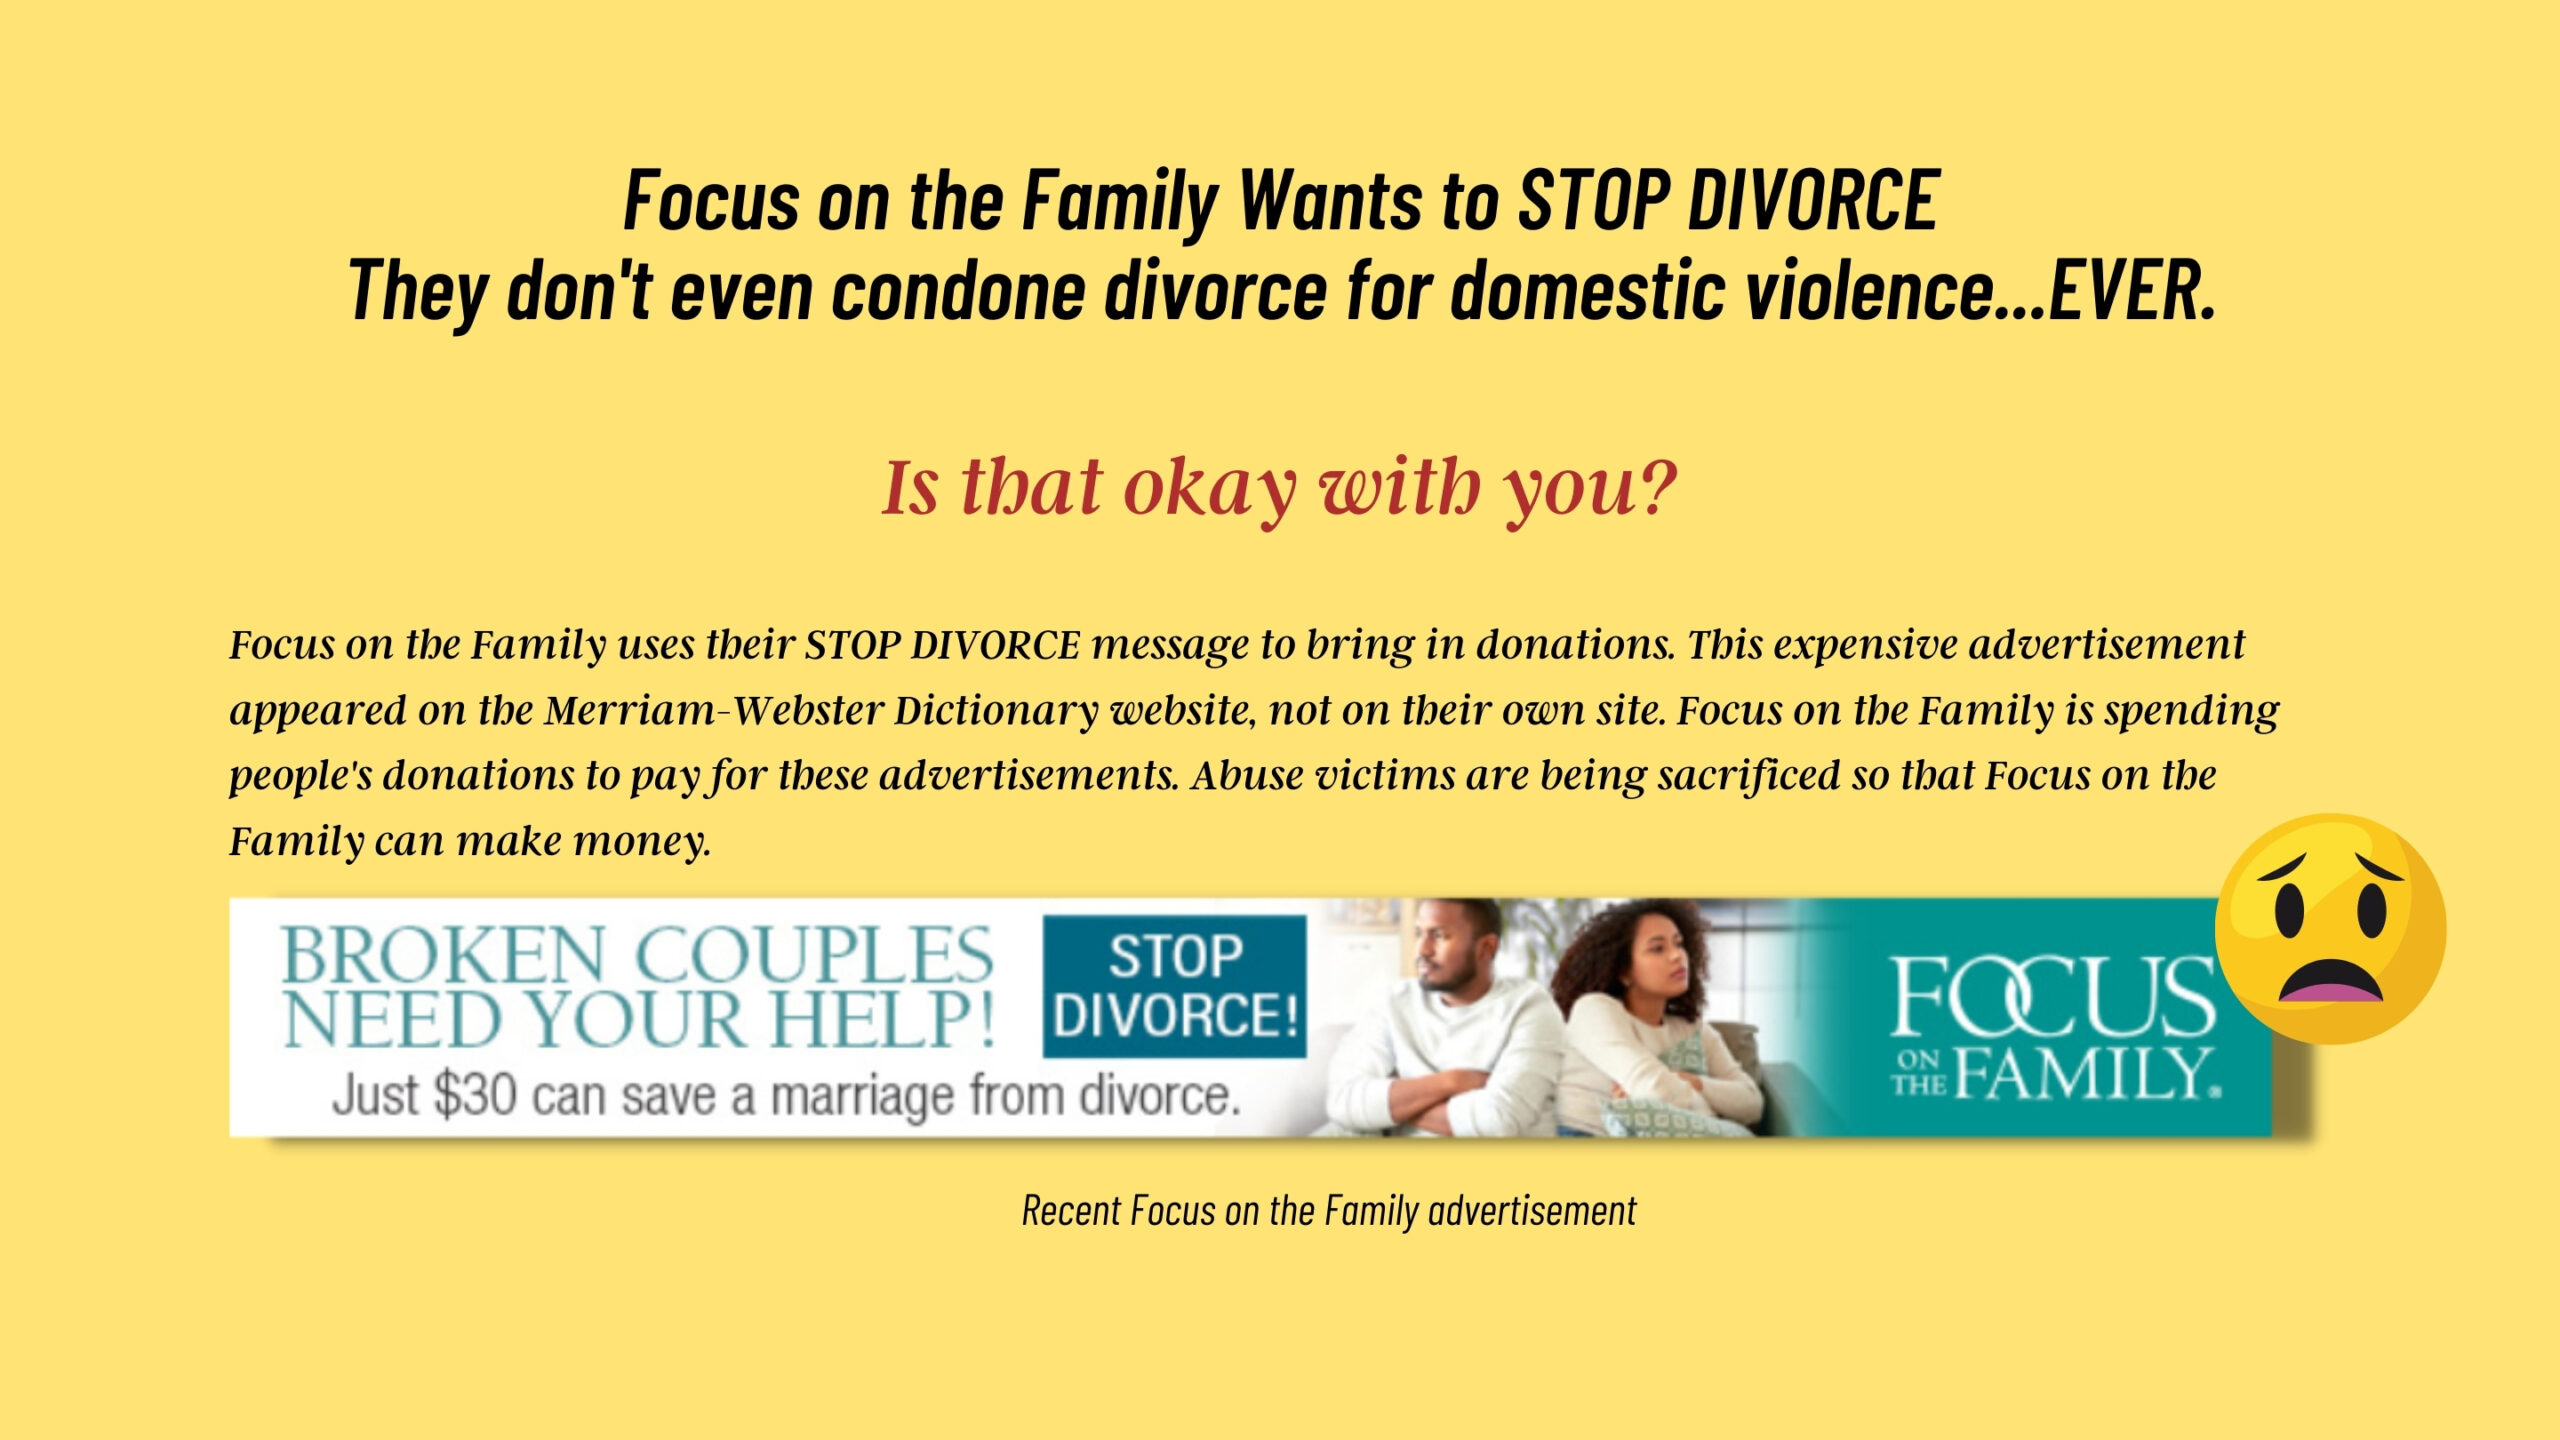 When safety isn't the issue... All Focus on the Family cares about is your marital status (4)